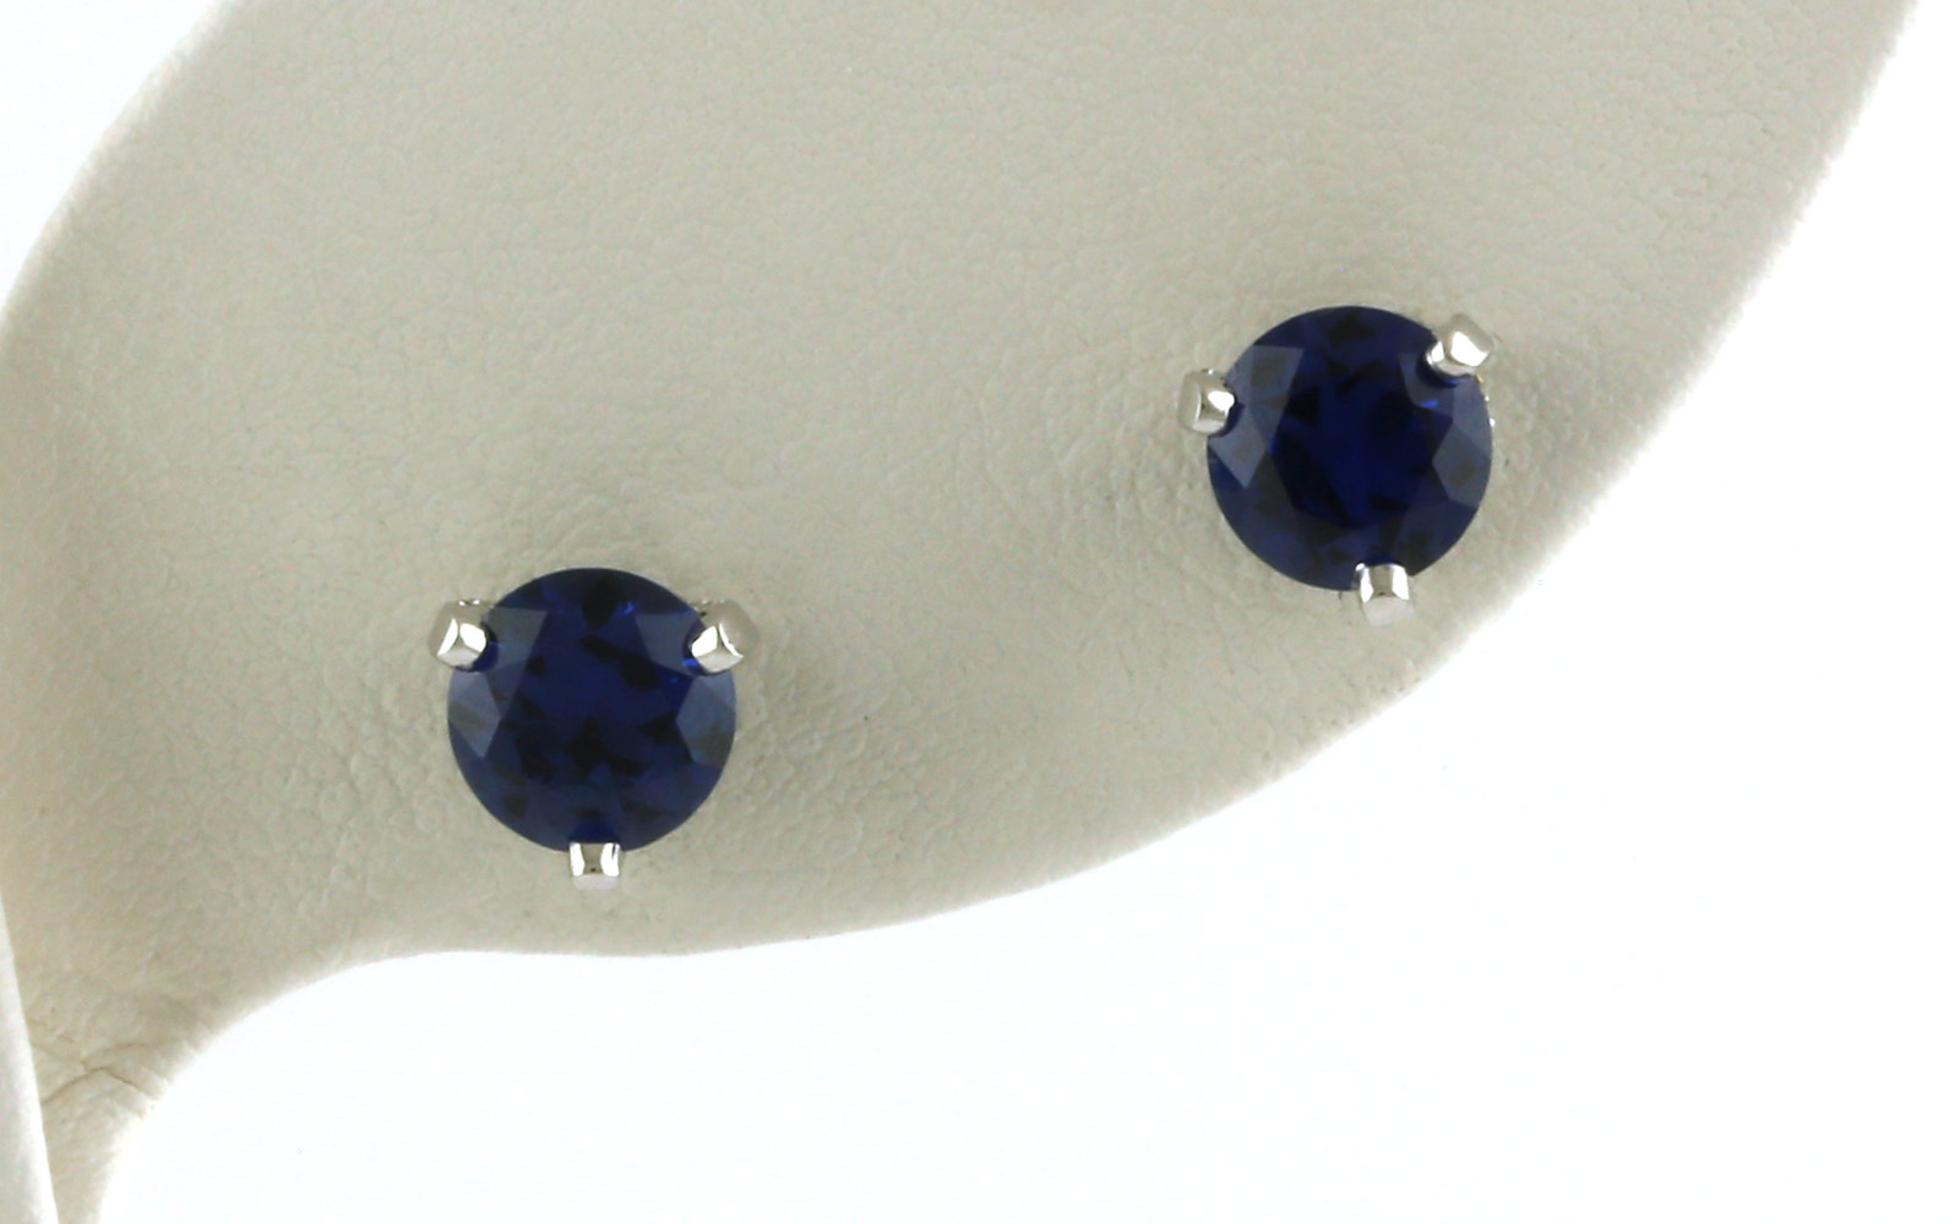 Montana Yogo Sapphire and Diamond Stud Earrings with Pave Diamond 3-Prong Settings in White Gold (2.36cts TWT)